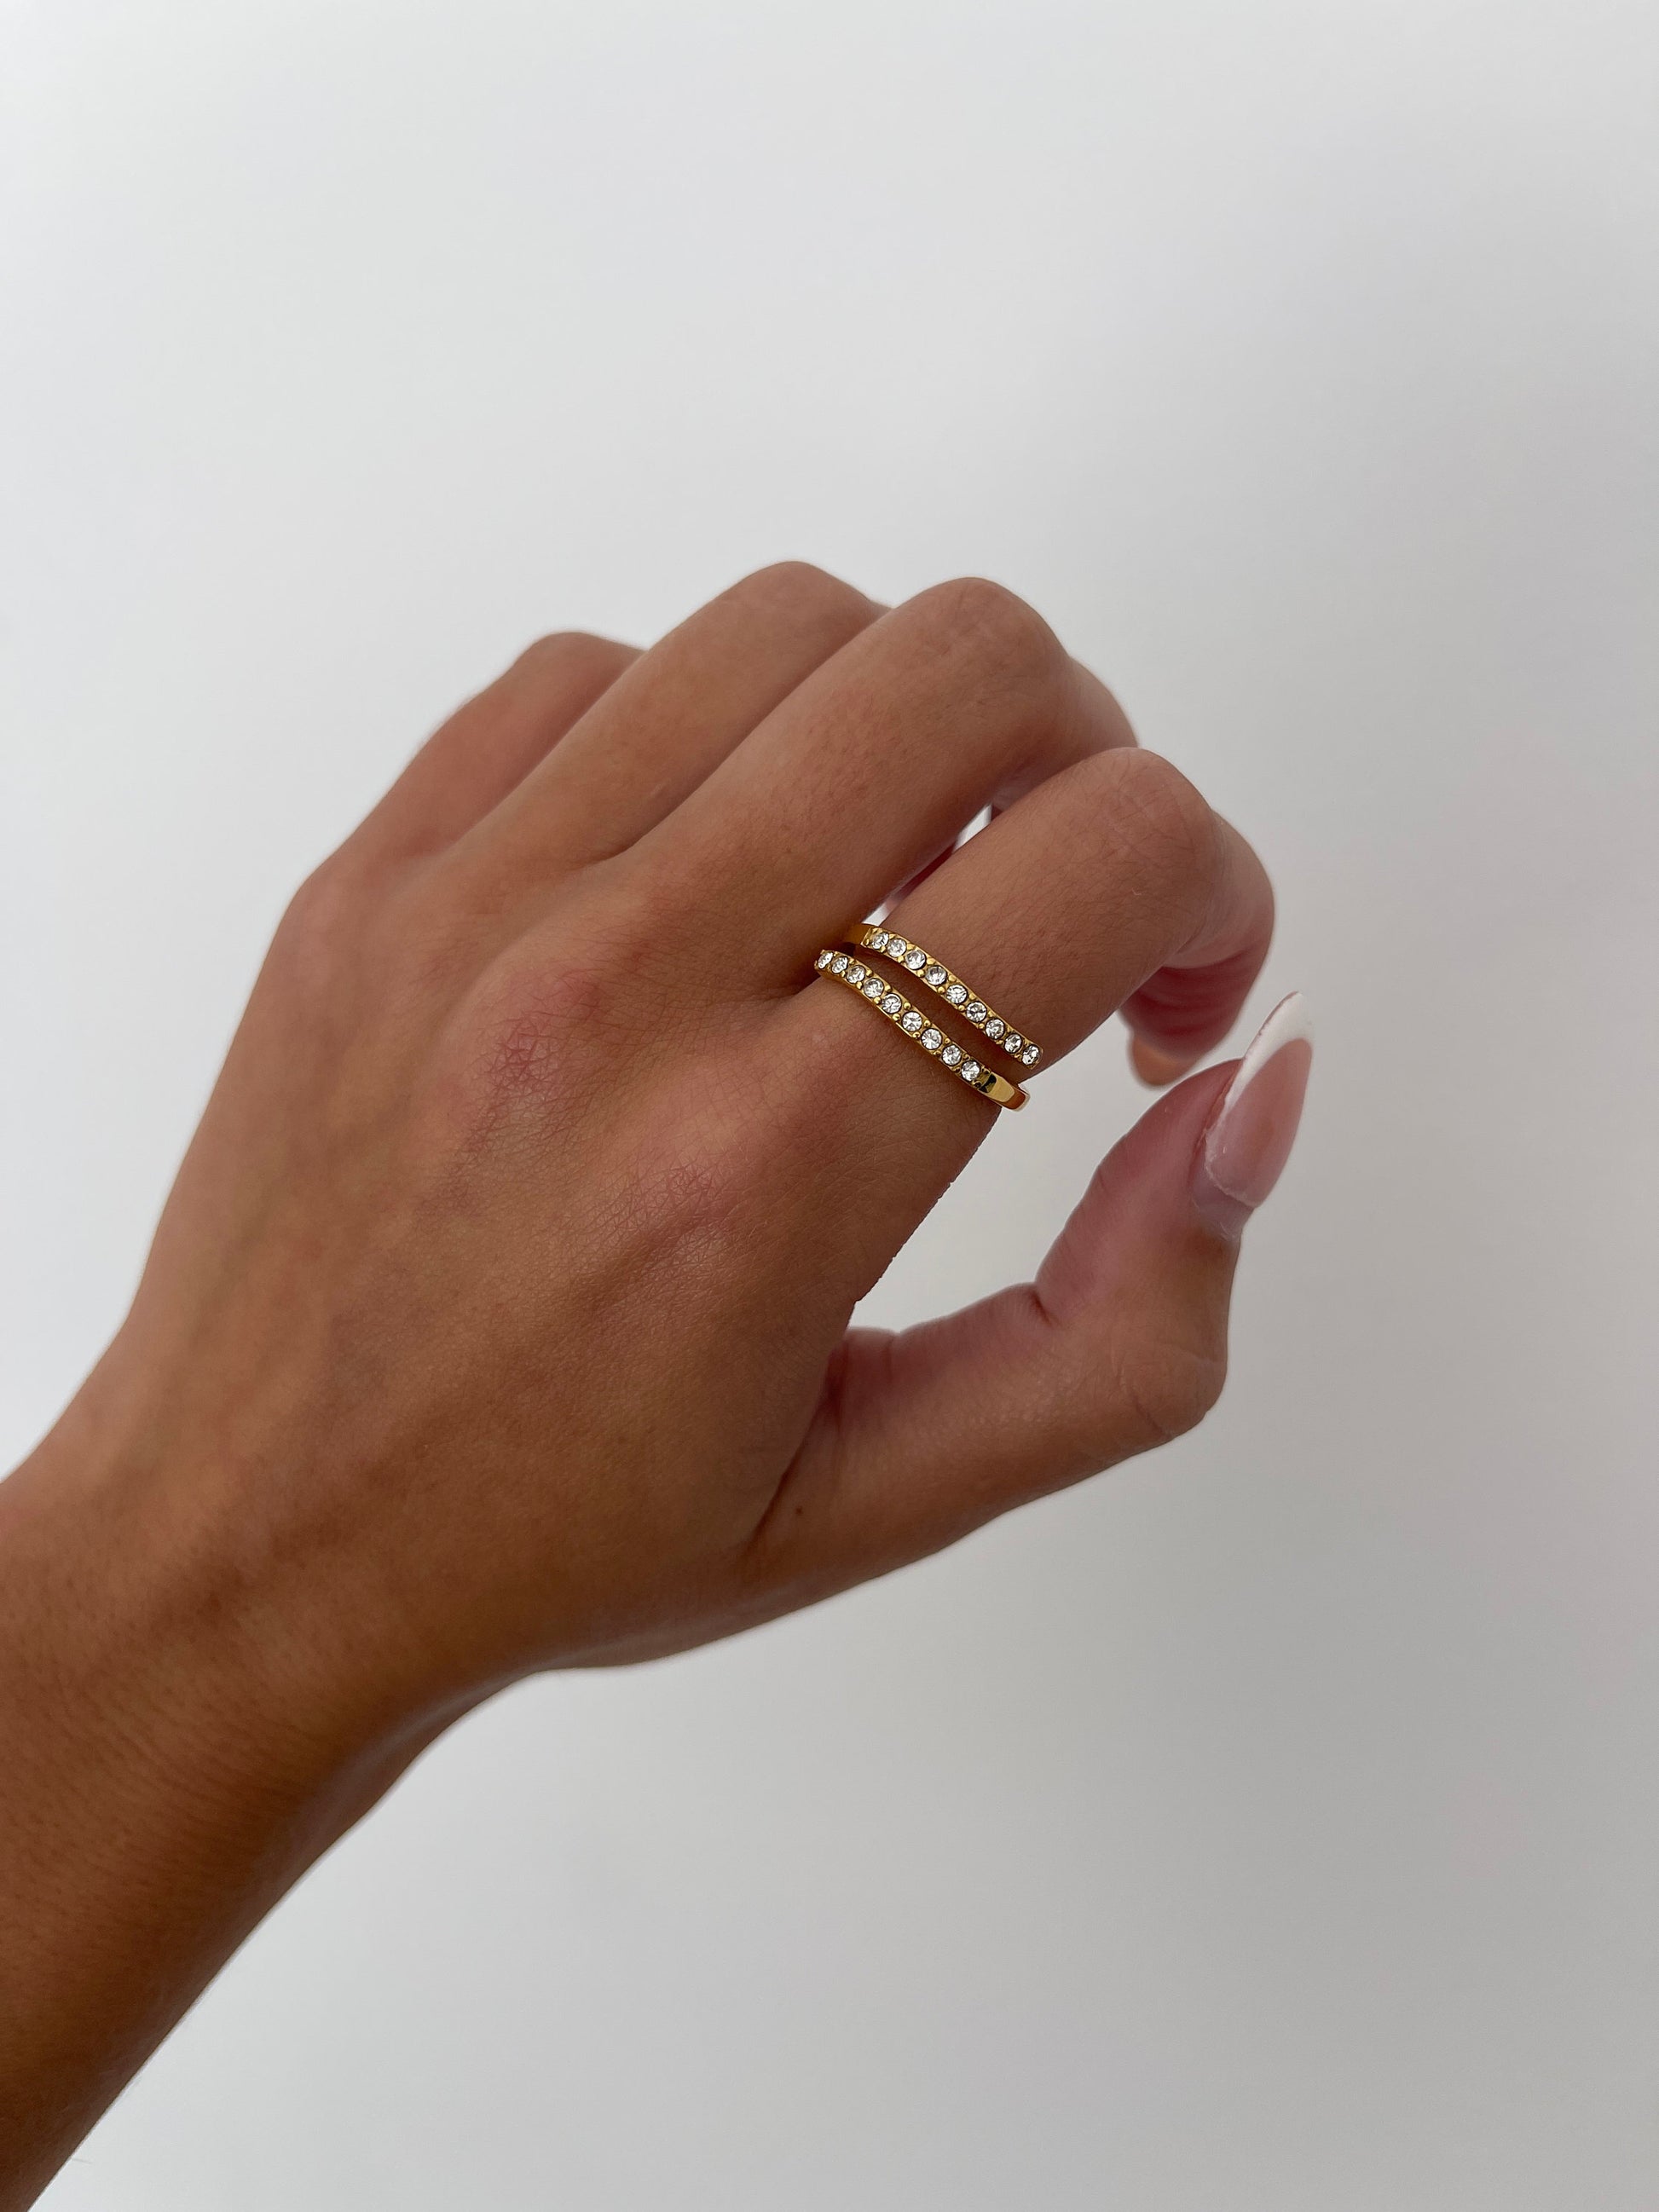 Adjustable ring gold, pave gold rings, wrap ring, open ring, minimalist gold adjustable ring, dainty gold ring, pave ring for women gifts